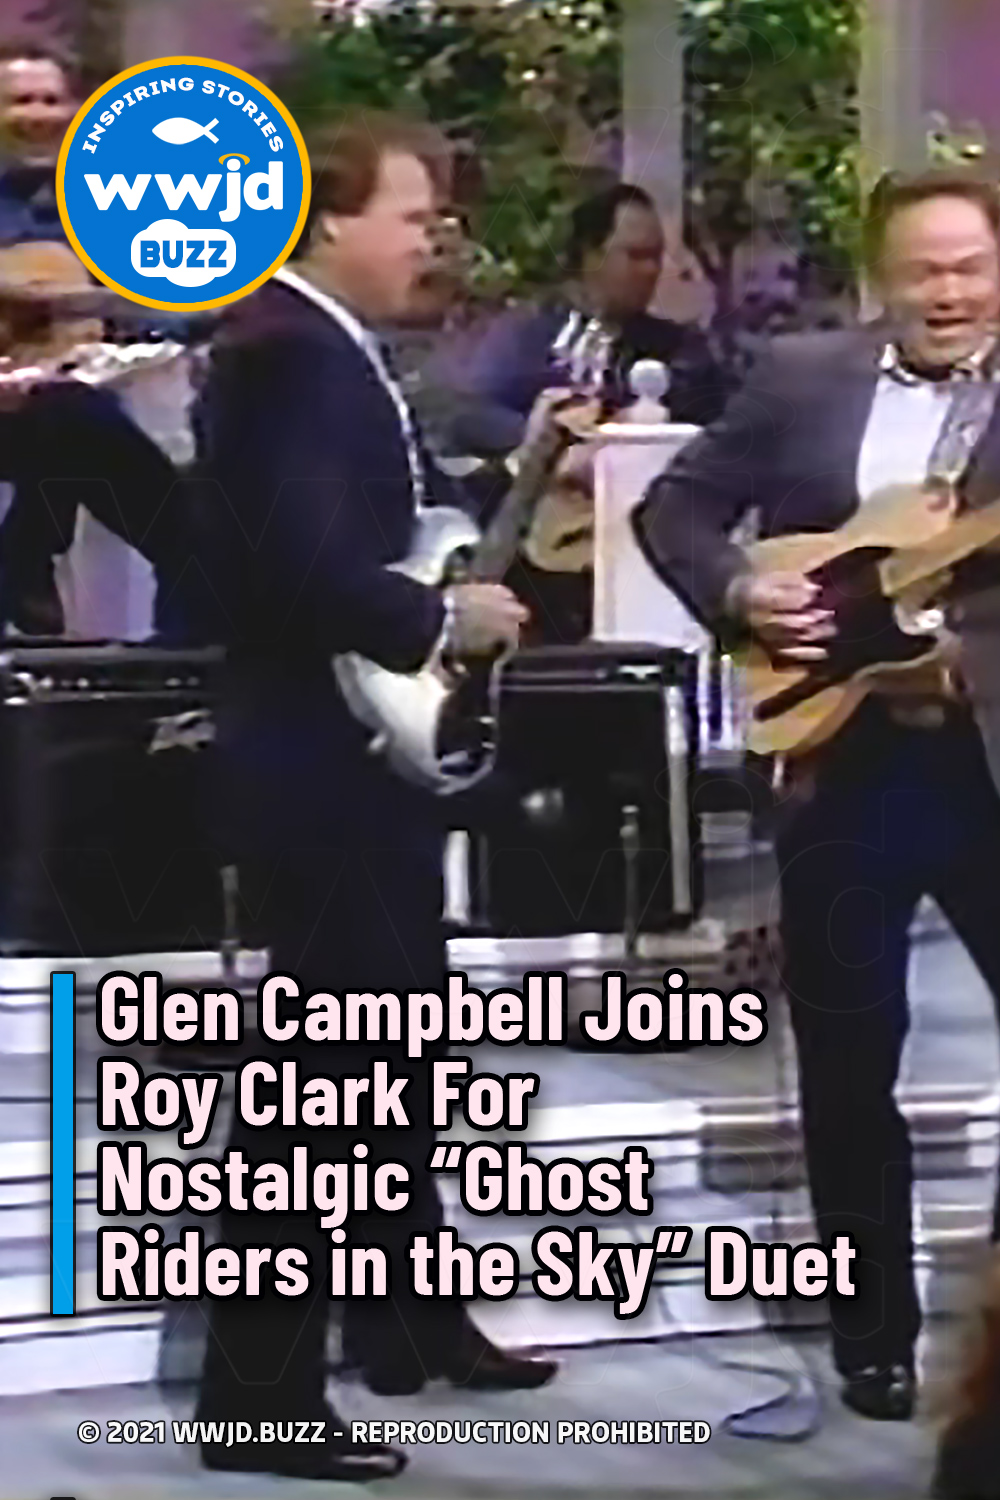 Glen Campbell Joins Roy Clark For Nostalgic “Ghost Riders in the Sky” Duet